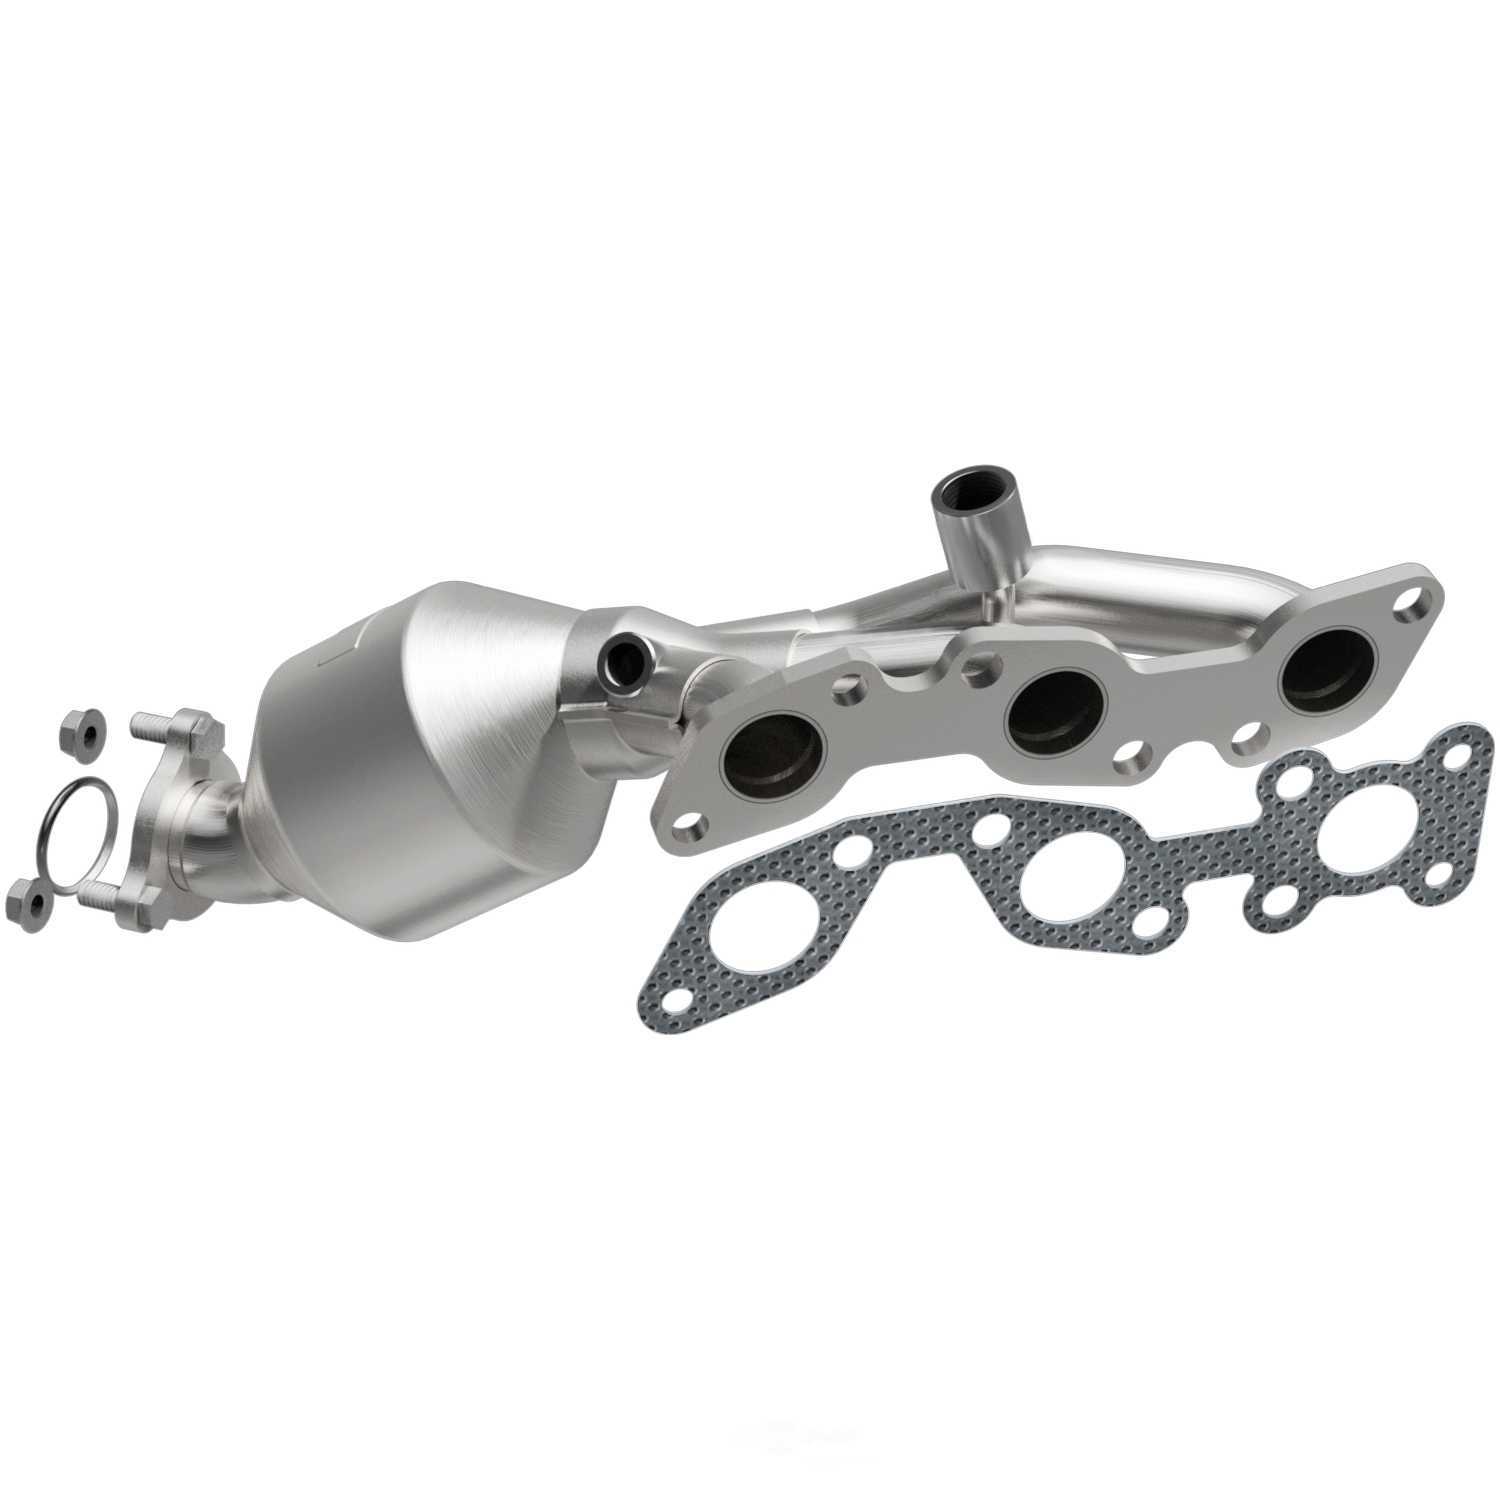 BREXHAUST EXHAUST - BRExhaust Federal Direct-Fit Premium Load OBDII Exhaust Manifold with In - BSL 096-1447